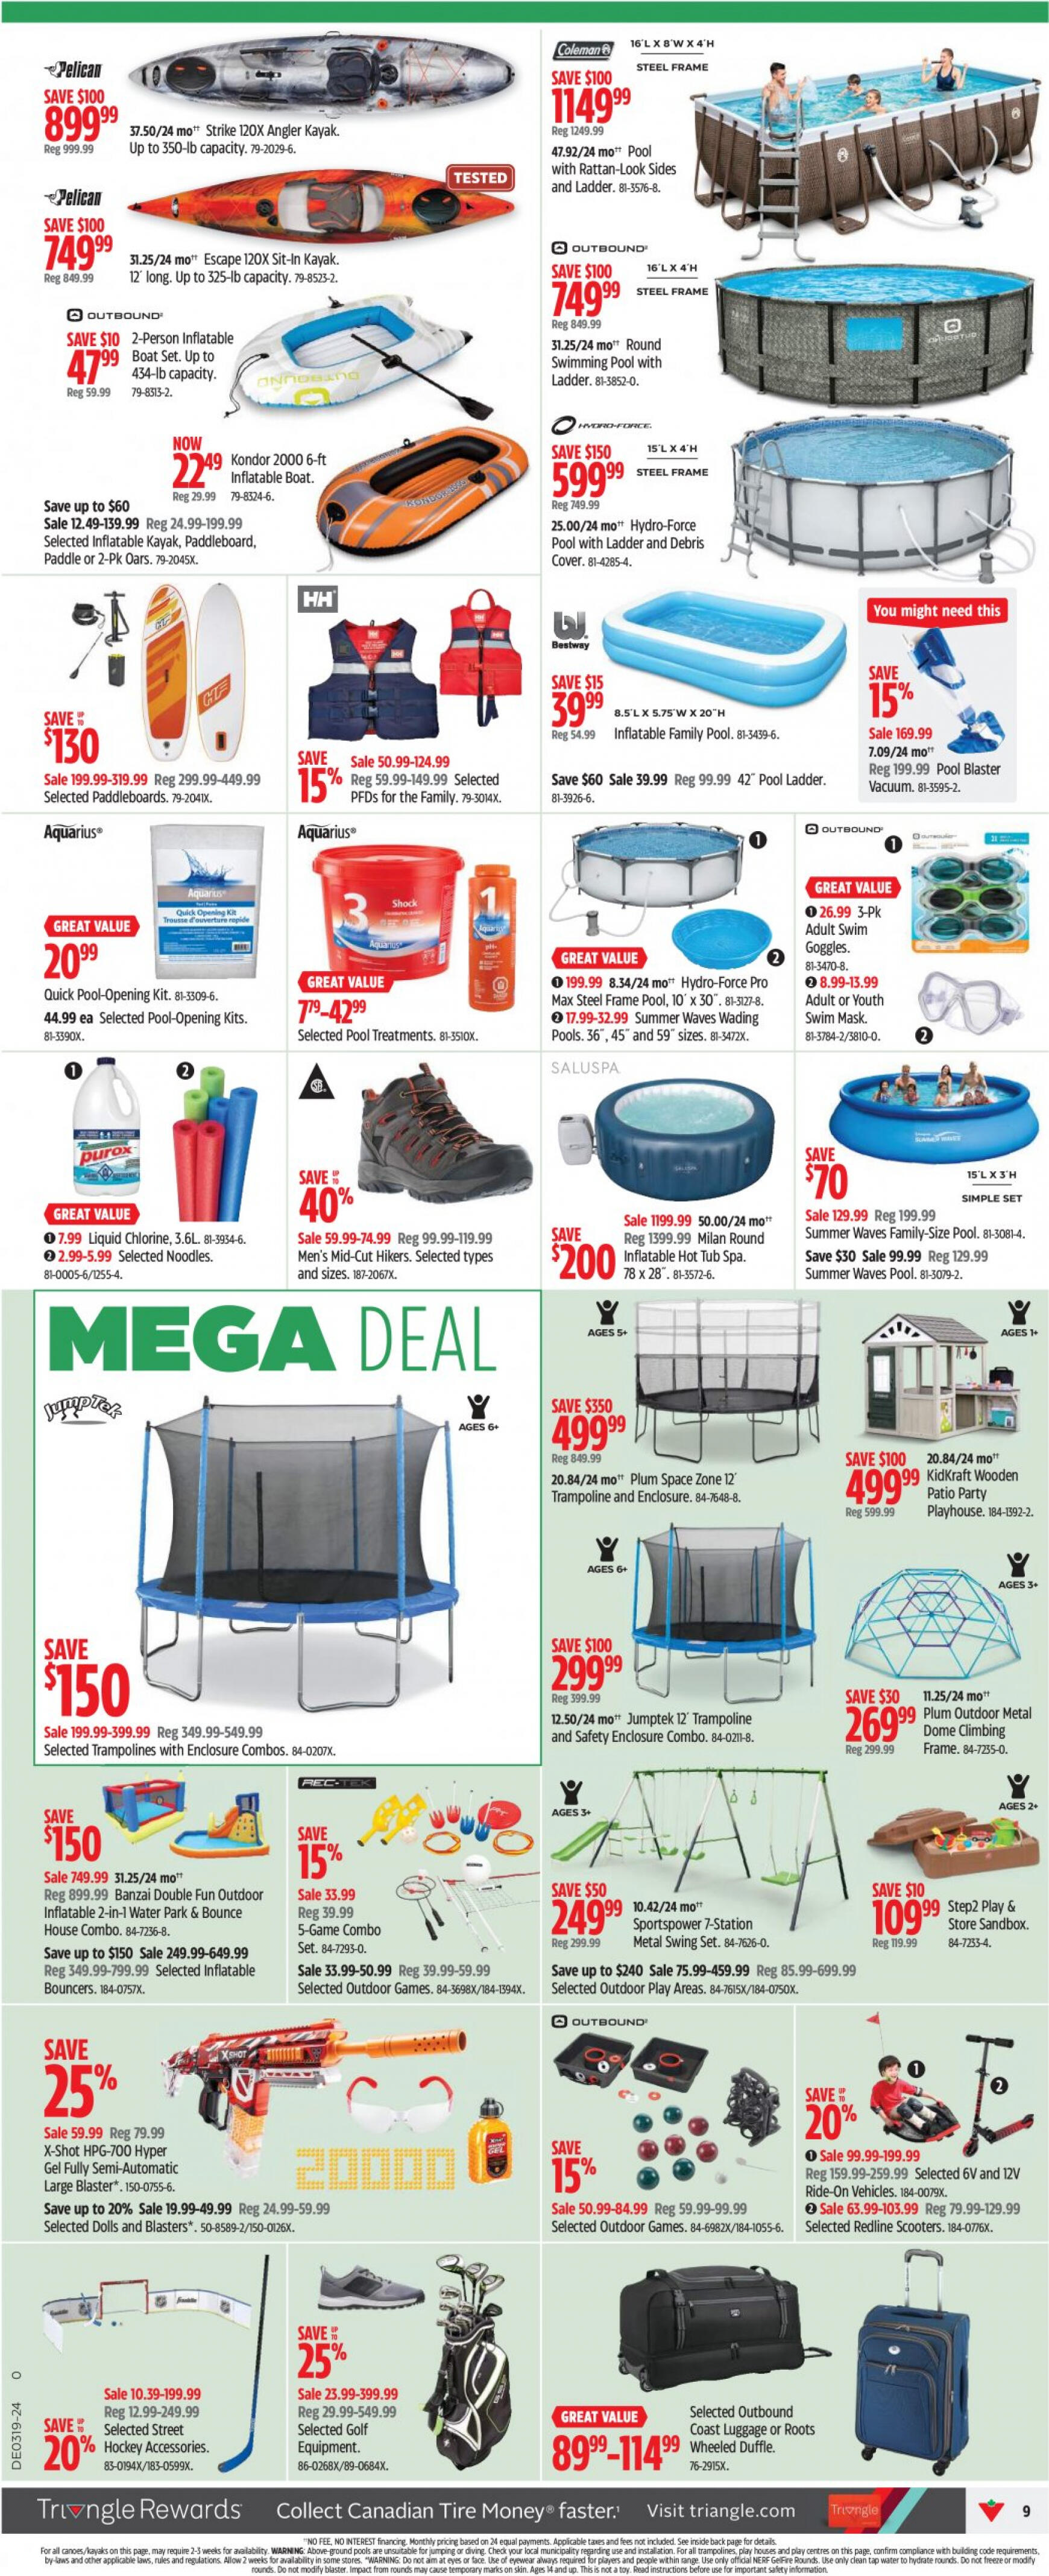 canadian-tire - Canadian Tire flyer current 02.05. - 08.05. - page: 8